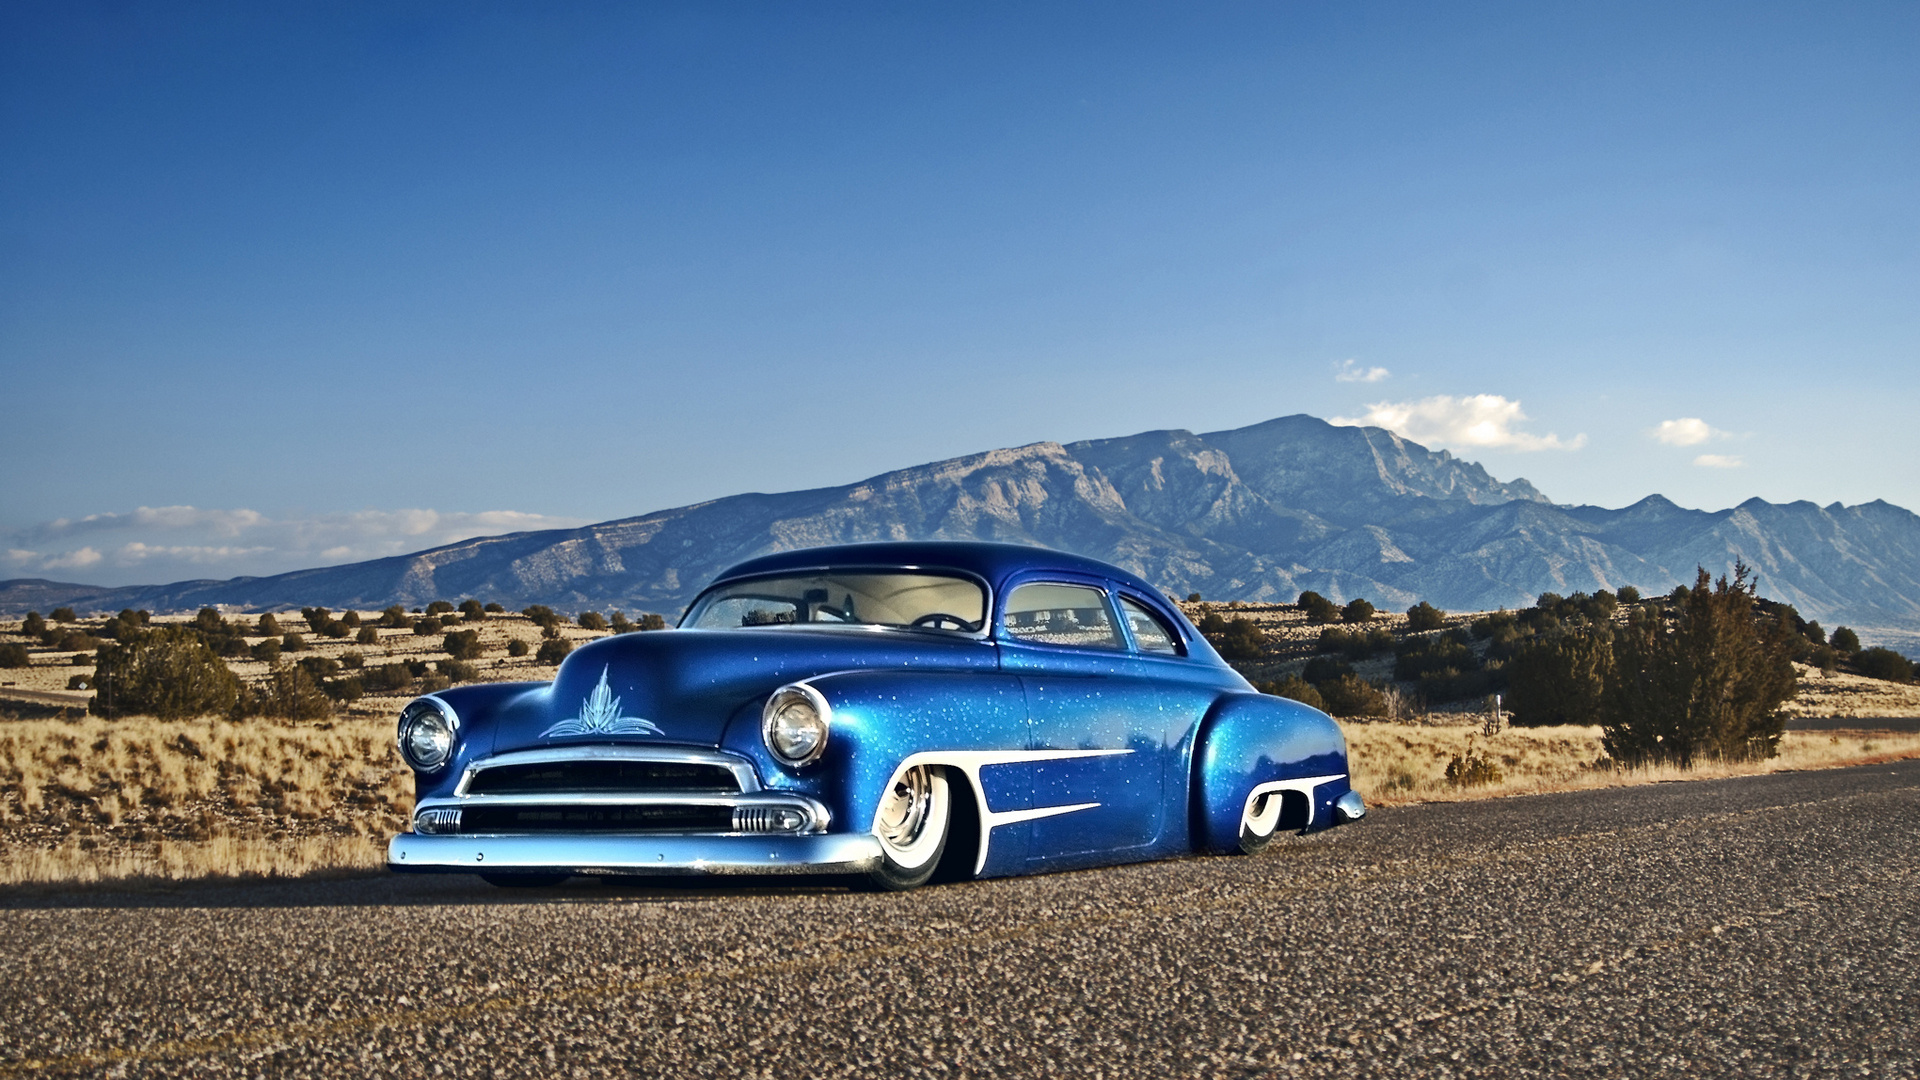 Vehicles 1951 Kaiser Dragon Coupe HD Wallpaper | Background Image